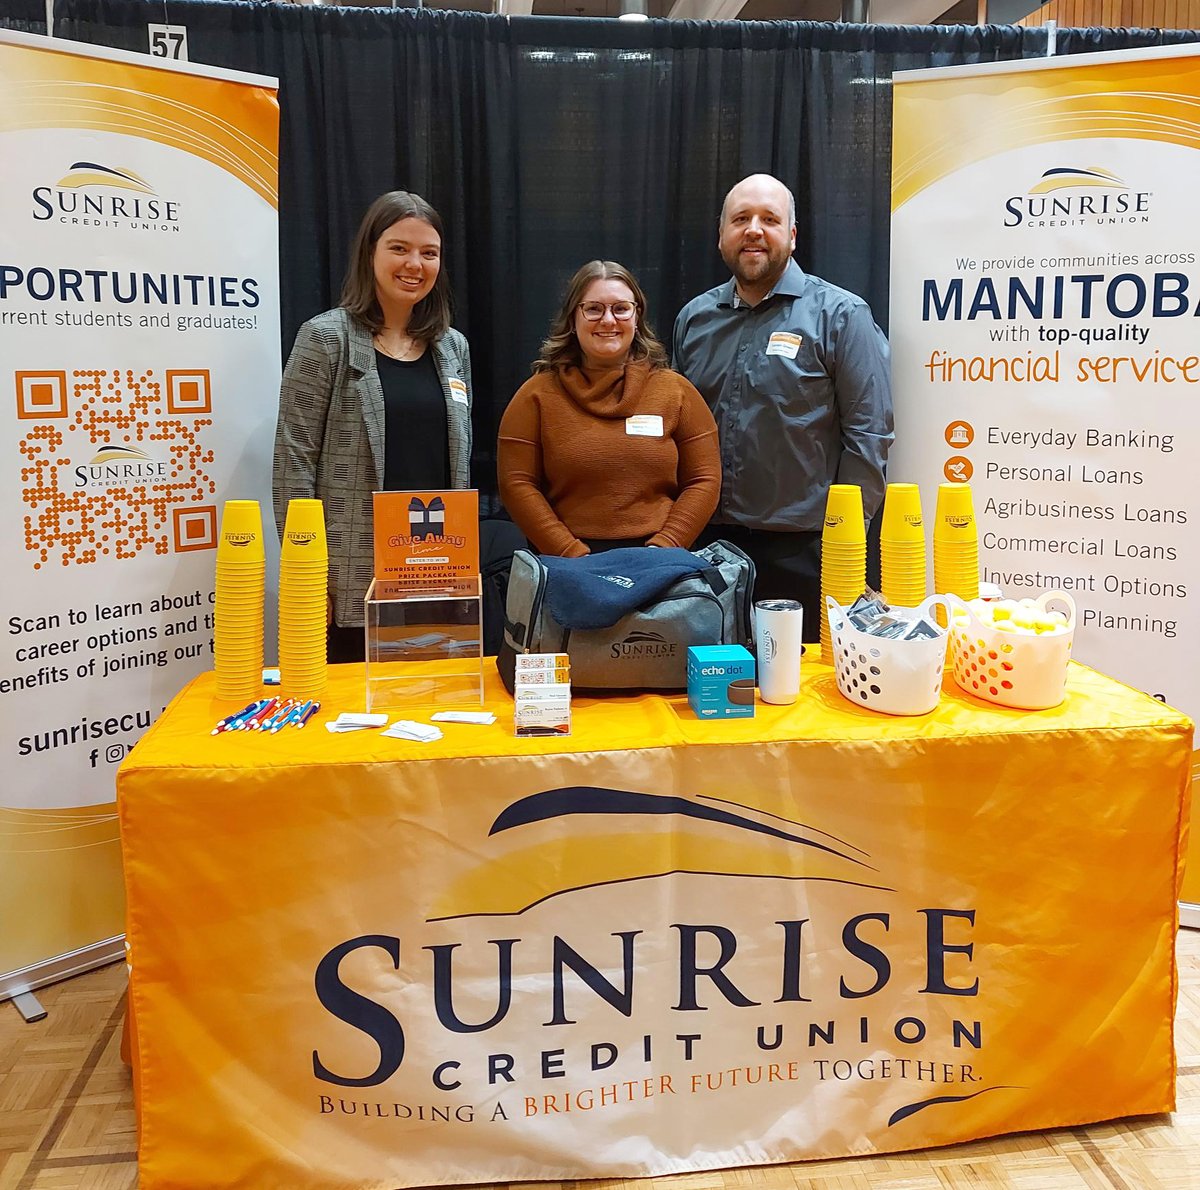 🙂 Sunrise is excited to participate in the U of M Annual Career Fair on January 17 -18 at the UMSU University Centre. Stop by to grab some Sunrise Swag and say hi!

#umanitoba #umstudent